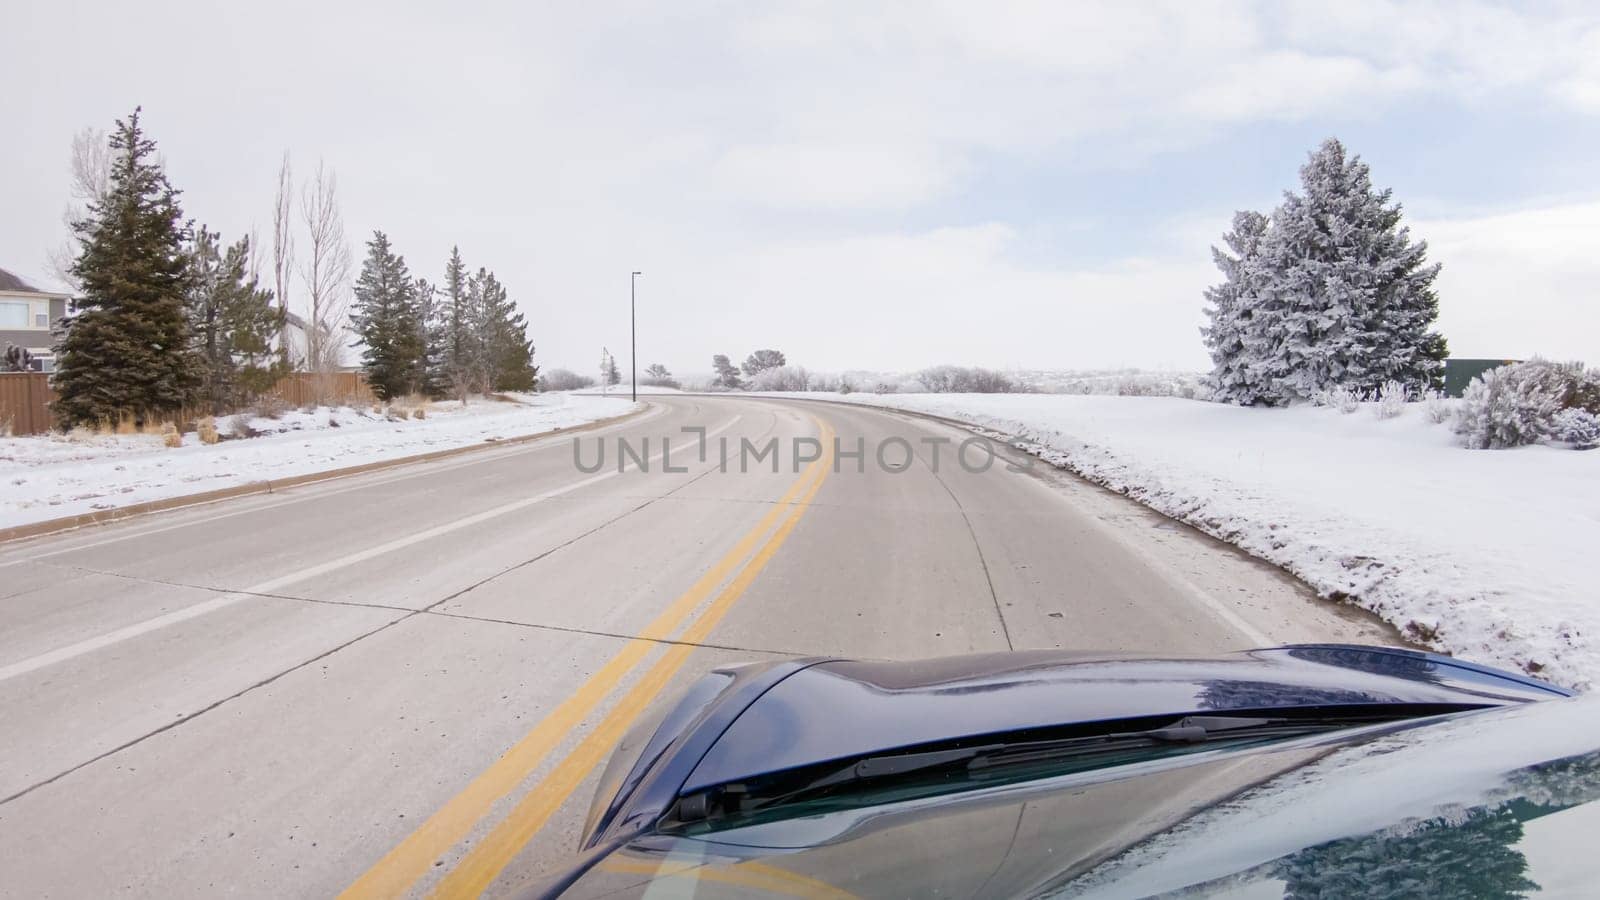 Traversing a freshly cleared, suburban road after a winter storm, one experiences a serene drive through an upscale residential neighborhood. Snow-covered houses and trees contribute to a picturesque winter scene, enhancing the tranquility of the journey.